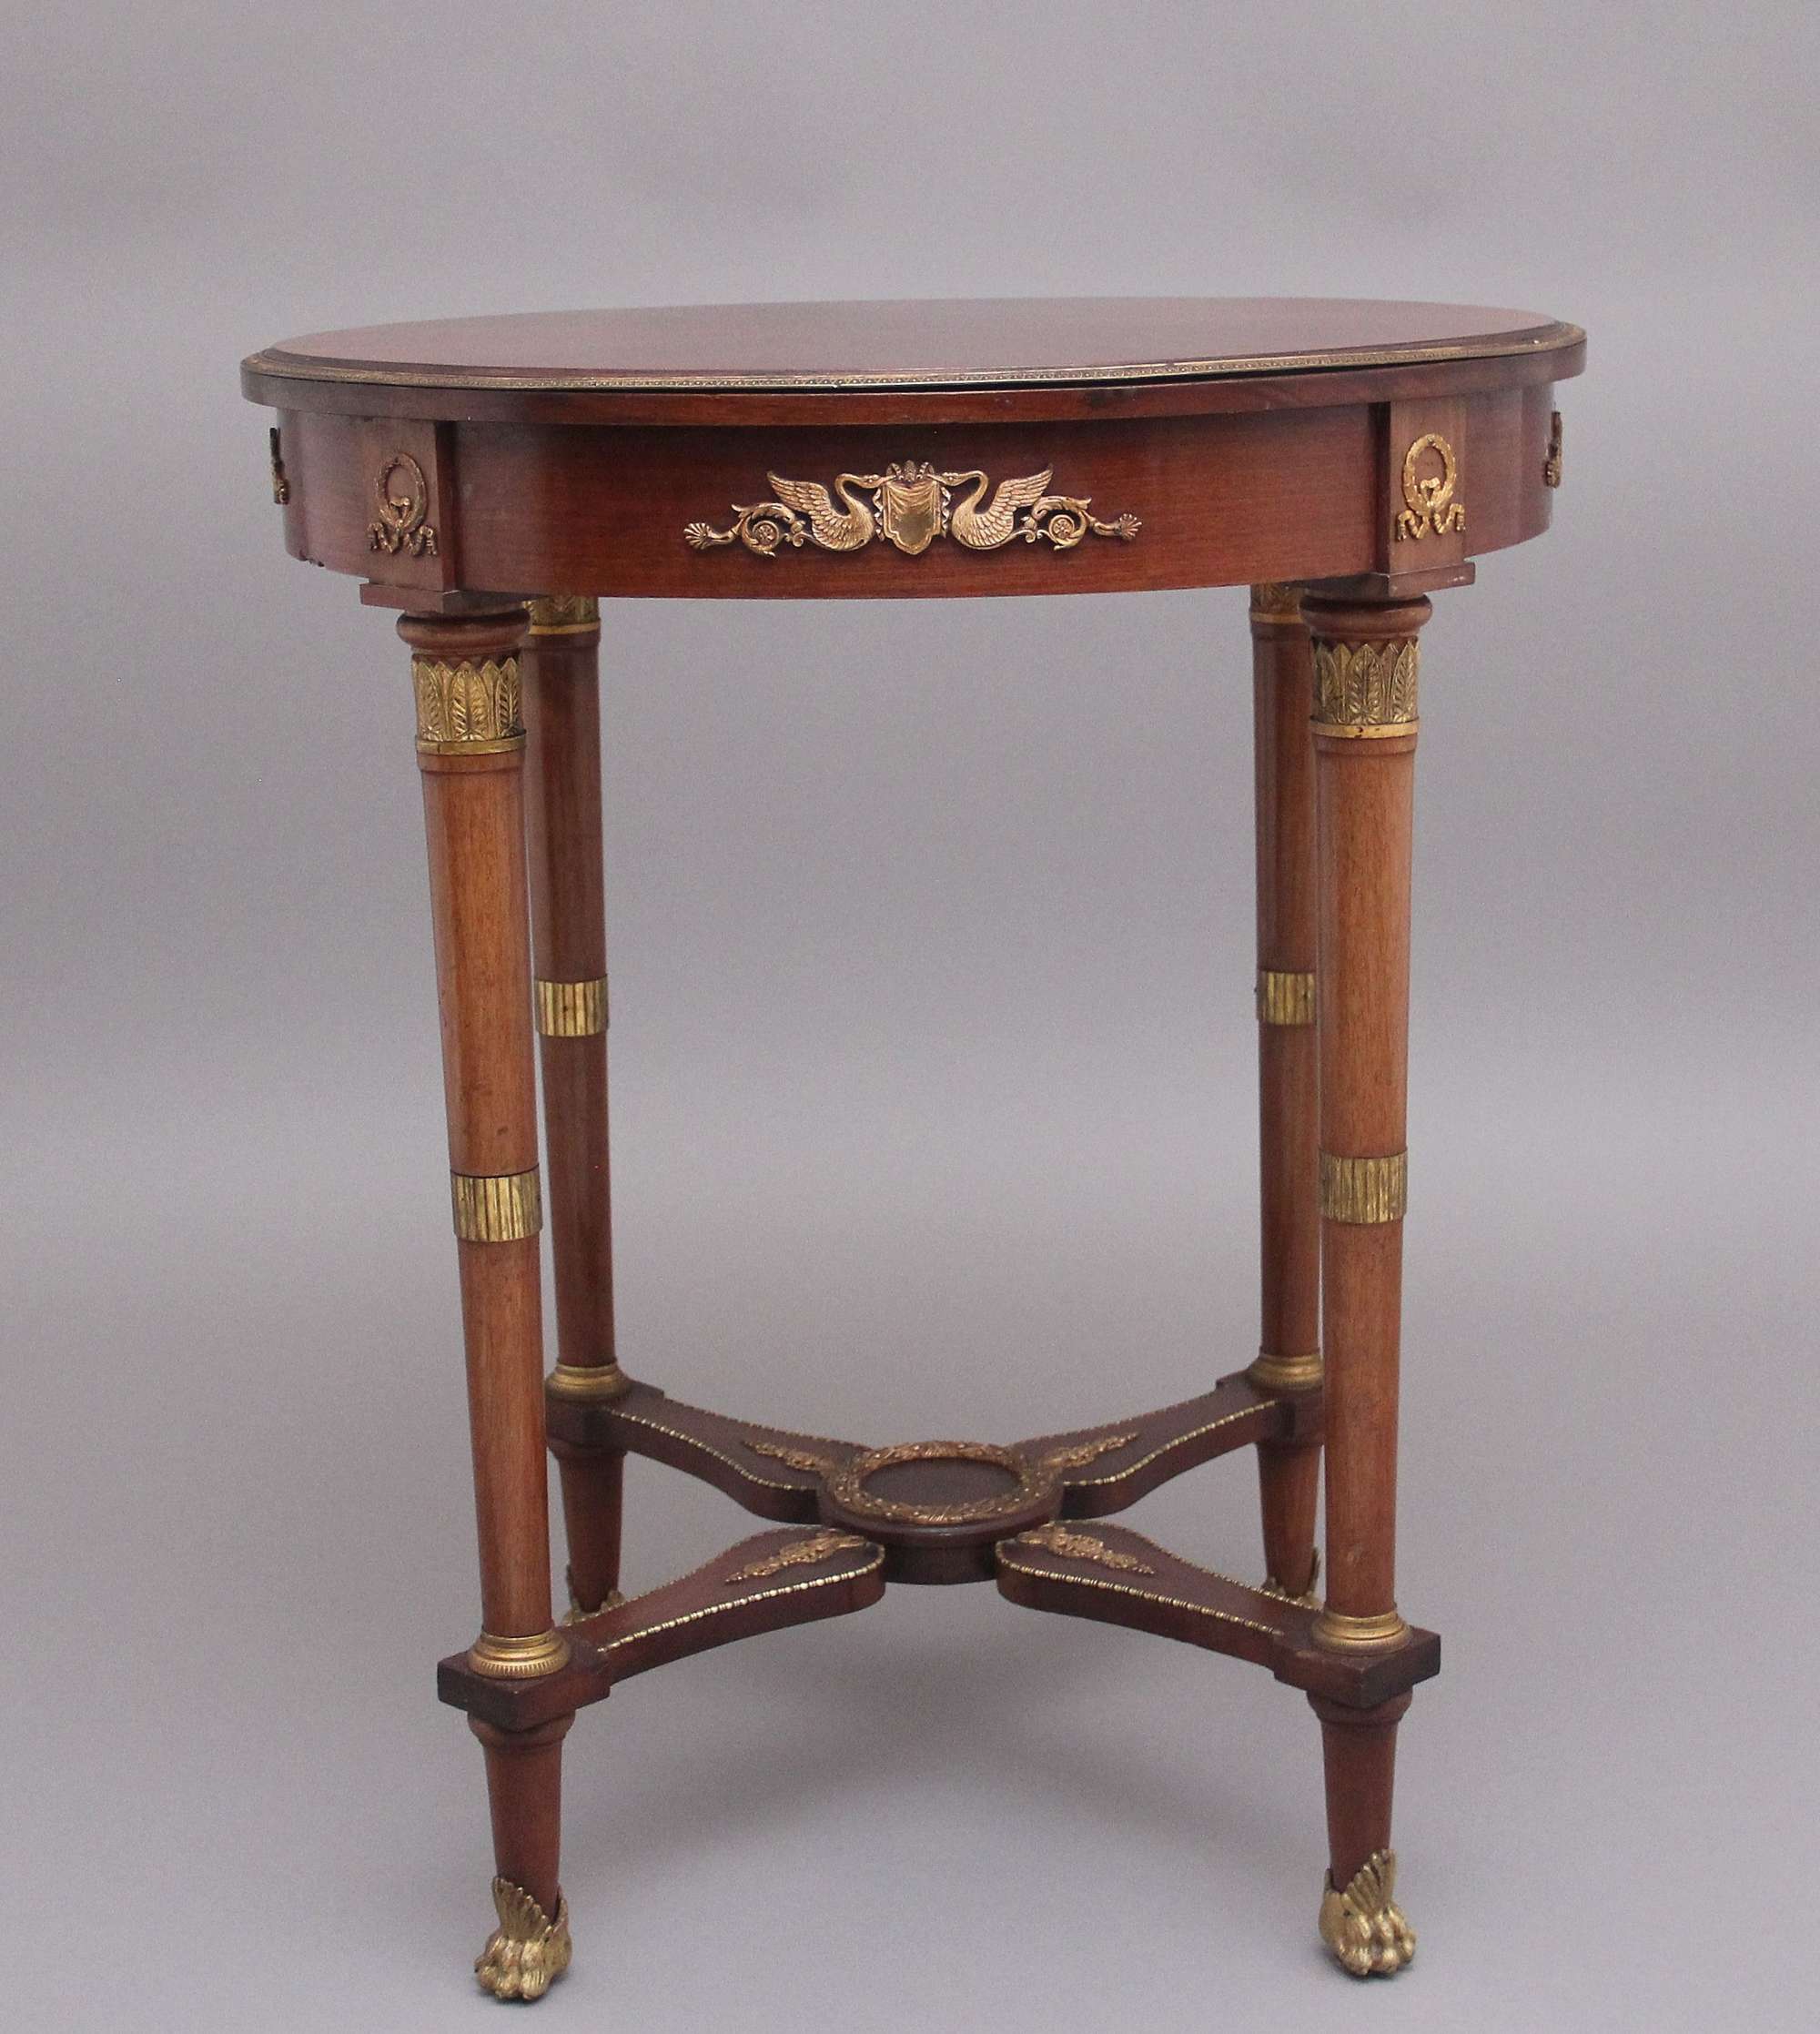 19th Century French Mahogany Centre Table In The Empire Style